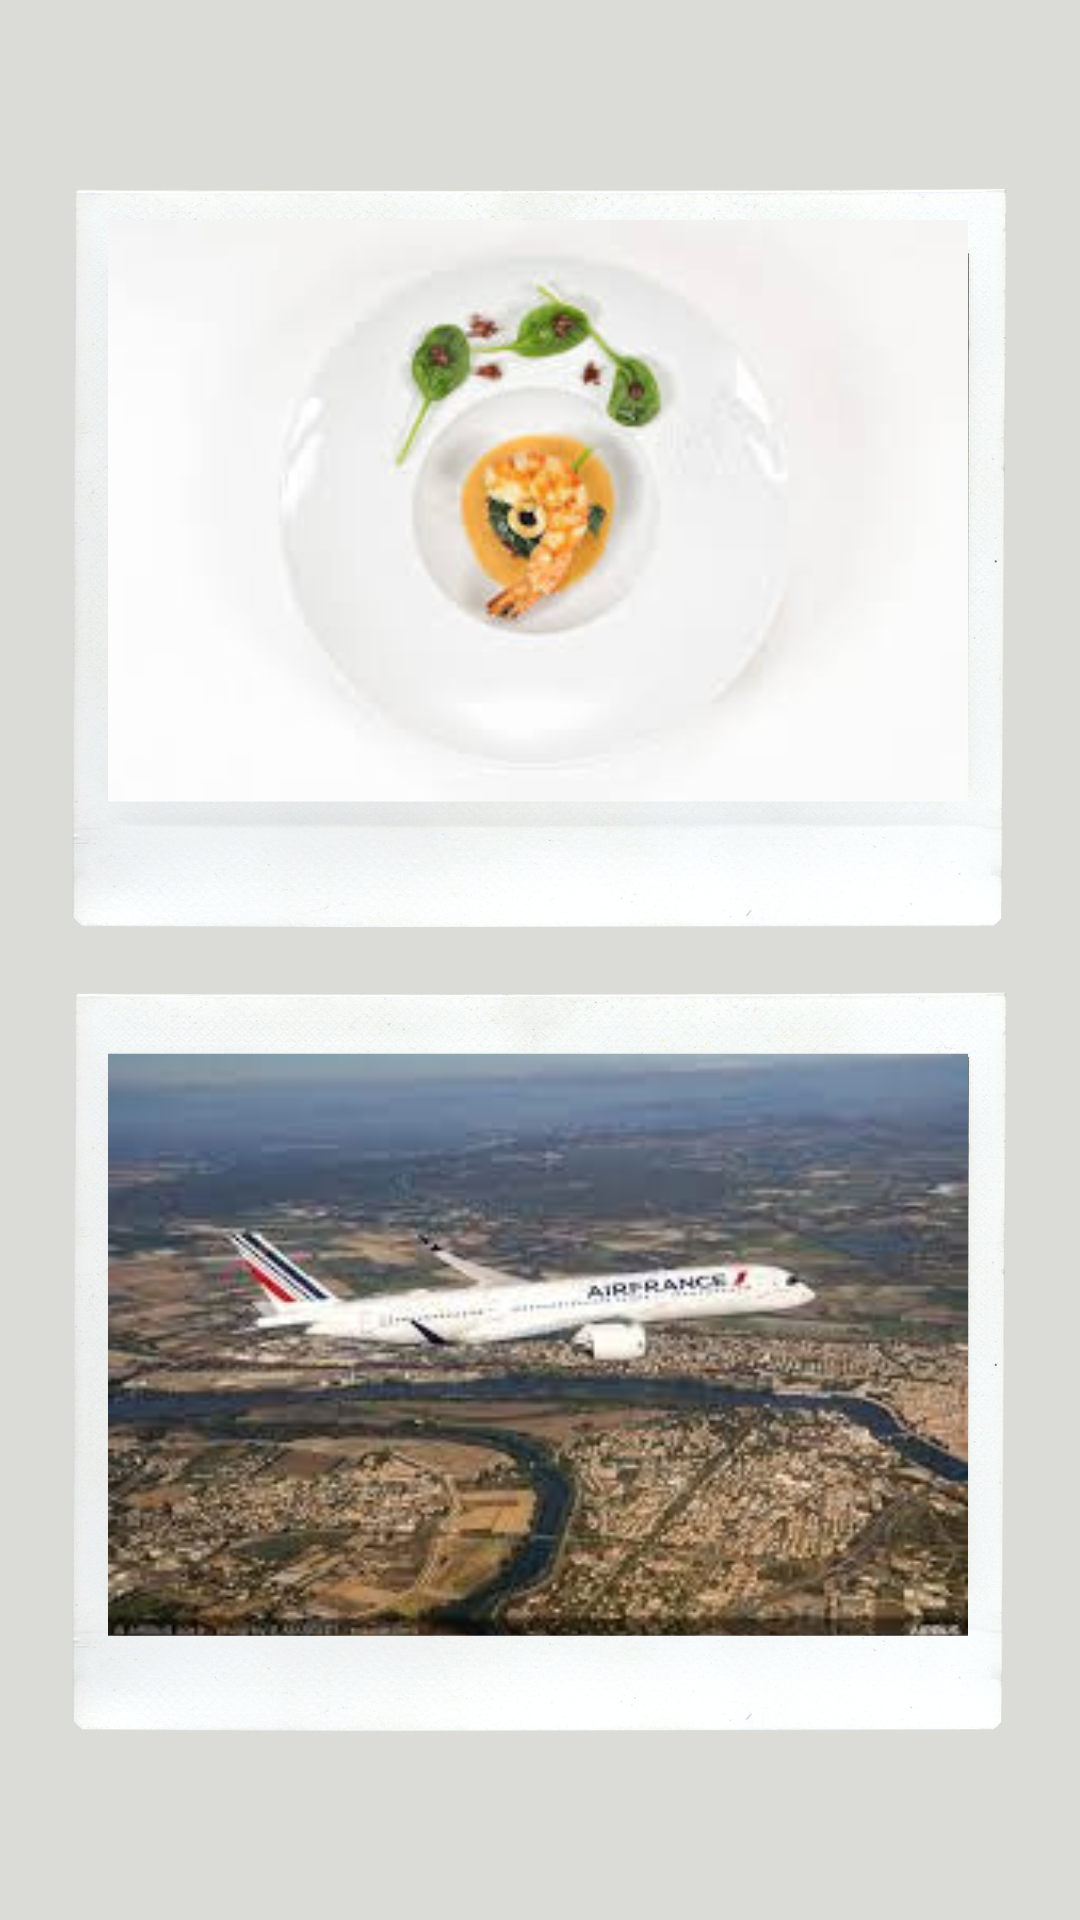 Air France announces 17 renowned chefs that will be creating lounge & inflight dining experiences in 2023